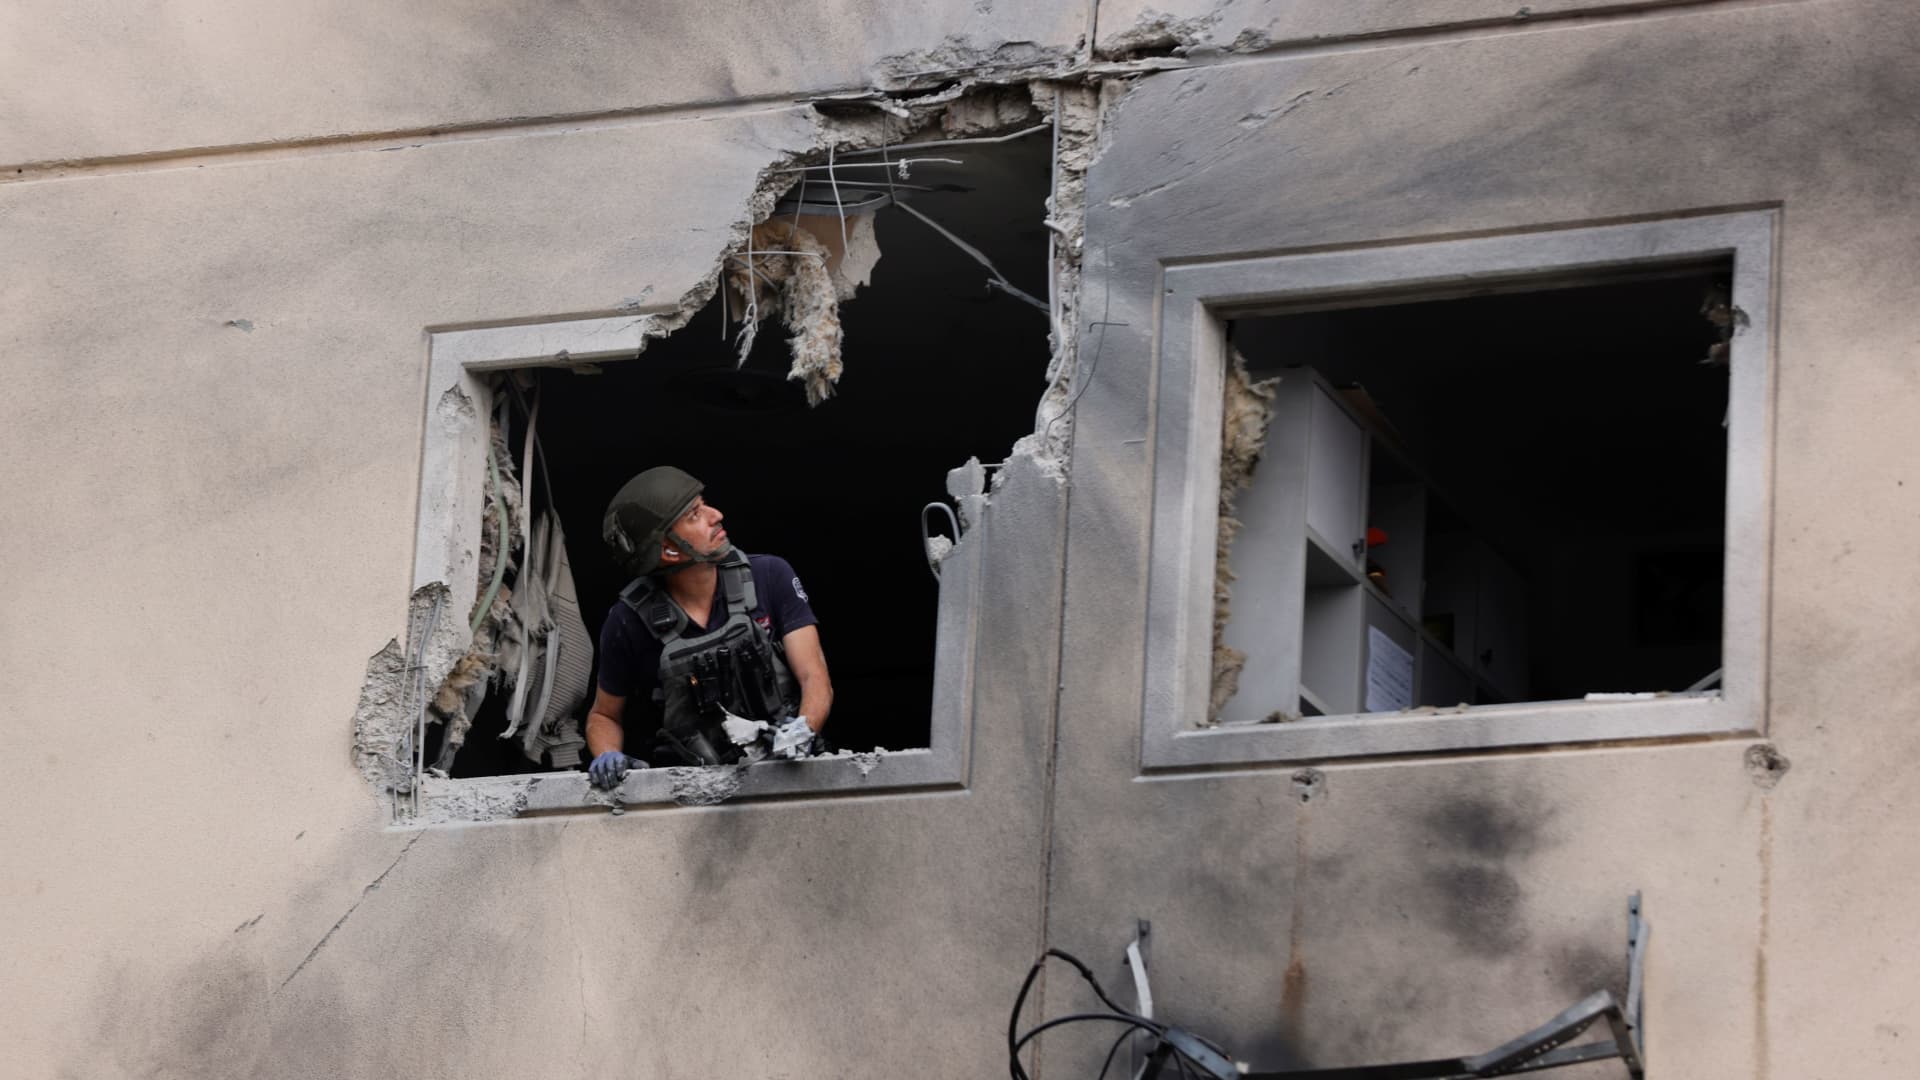 An Israeli police bomb disposal expert looks out from the window of a residential building that was damaged after it was hit by a rocket launched from the Gaza Strip, in Ashkelon, southern Israel May 11, 2021.